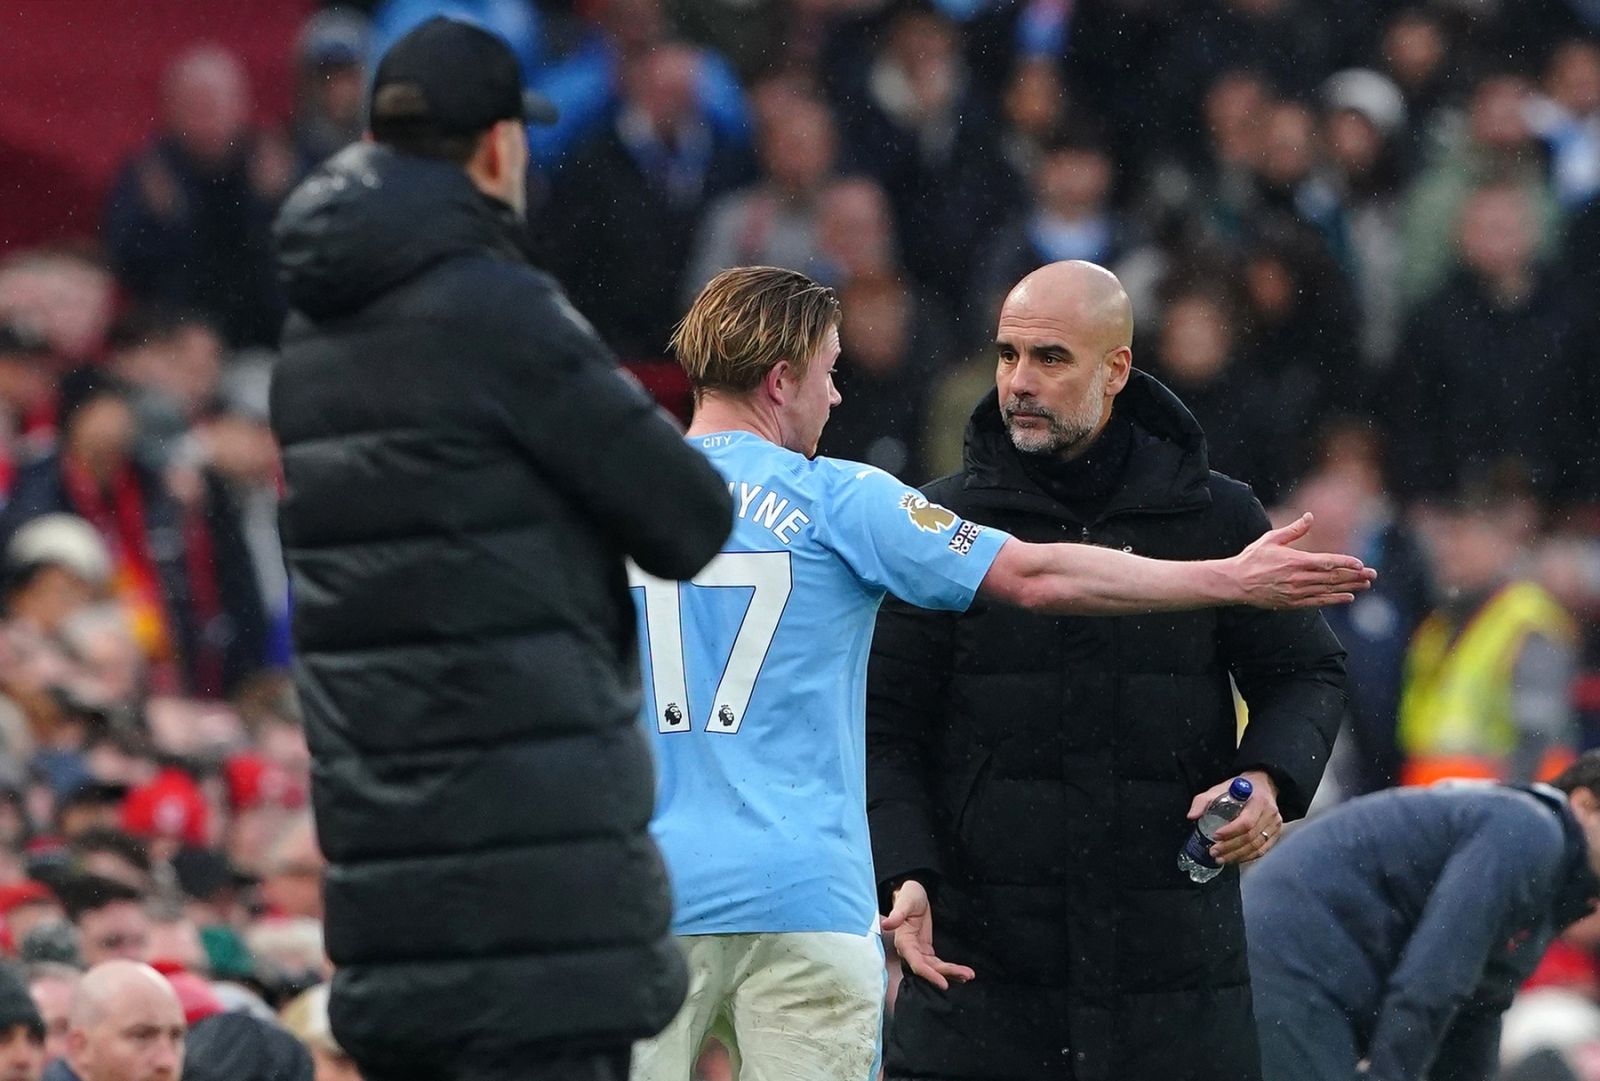 Manchester City's Kevin De Bruyne argues with manager Pep Guardiola after being substituted during the Premier League match at Anfield, Liverpool. Picture date: Sunday March 10, 2024.,Image: 855578279, License: Rights-managed, Restrictions: EDITORIAL USE ONLY No use with unauthorised audio, video, data, fixture lists, club/league logos or "live" services. Online in-match use limited to 120 images, no video emulation. No use in betting, games or single club/league/player publications., Model Release: no, Credit line: Peter Byrne / PA Images / Profimedia